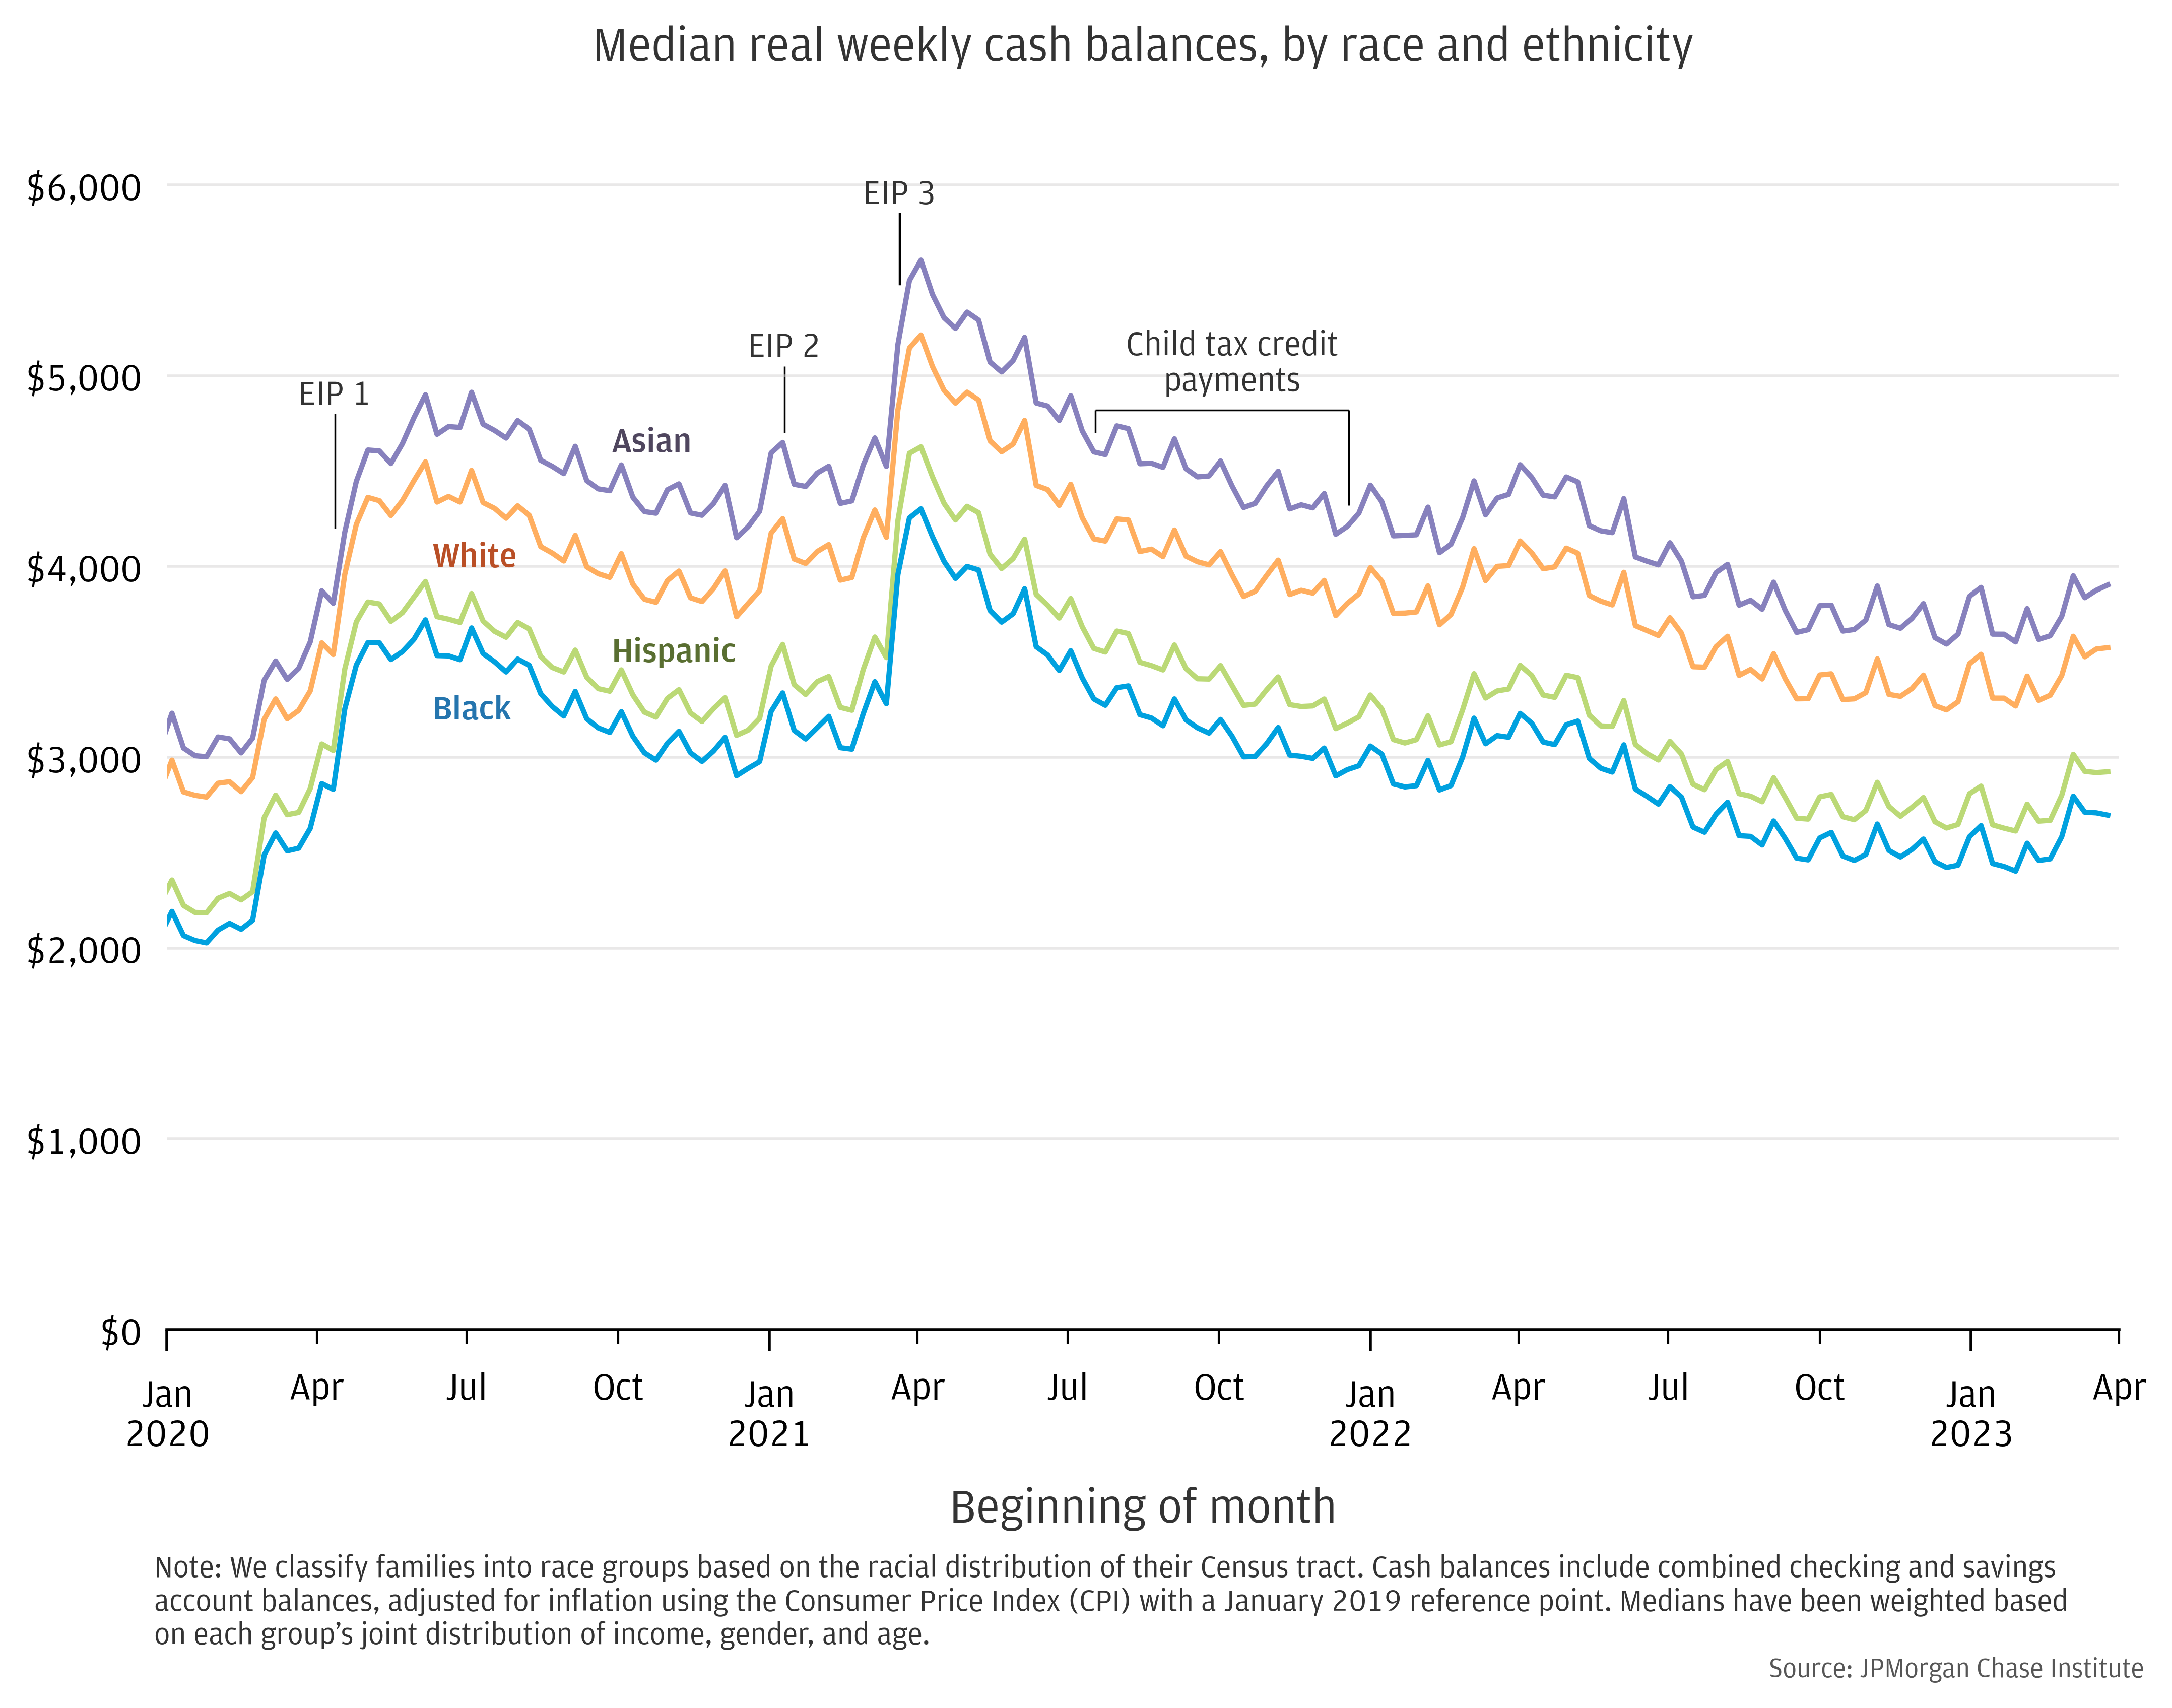 Median weekly cash balances, by race and ethnicity